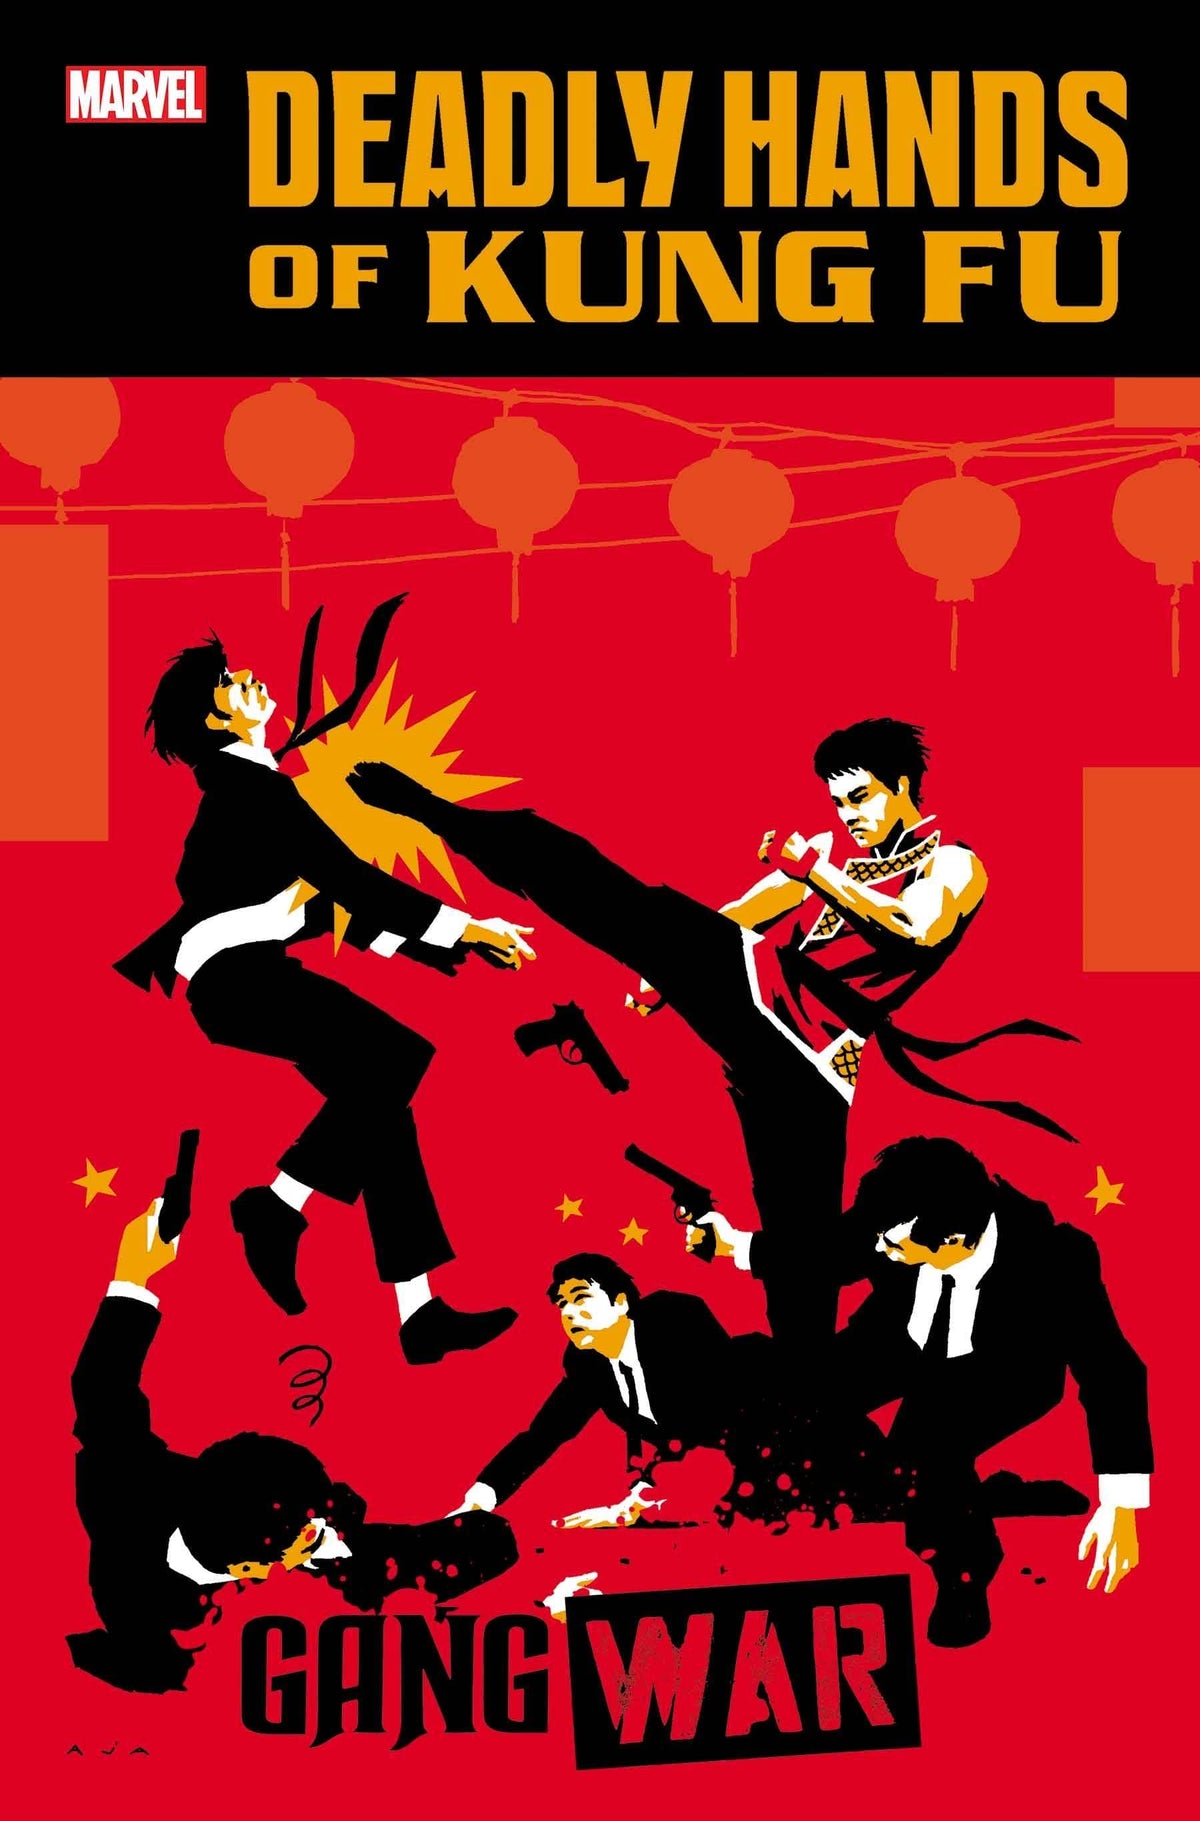 DEADLY HANDS OF KUNG FU GANG WAR #2IMAGE COVER